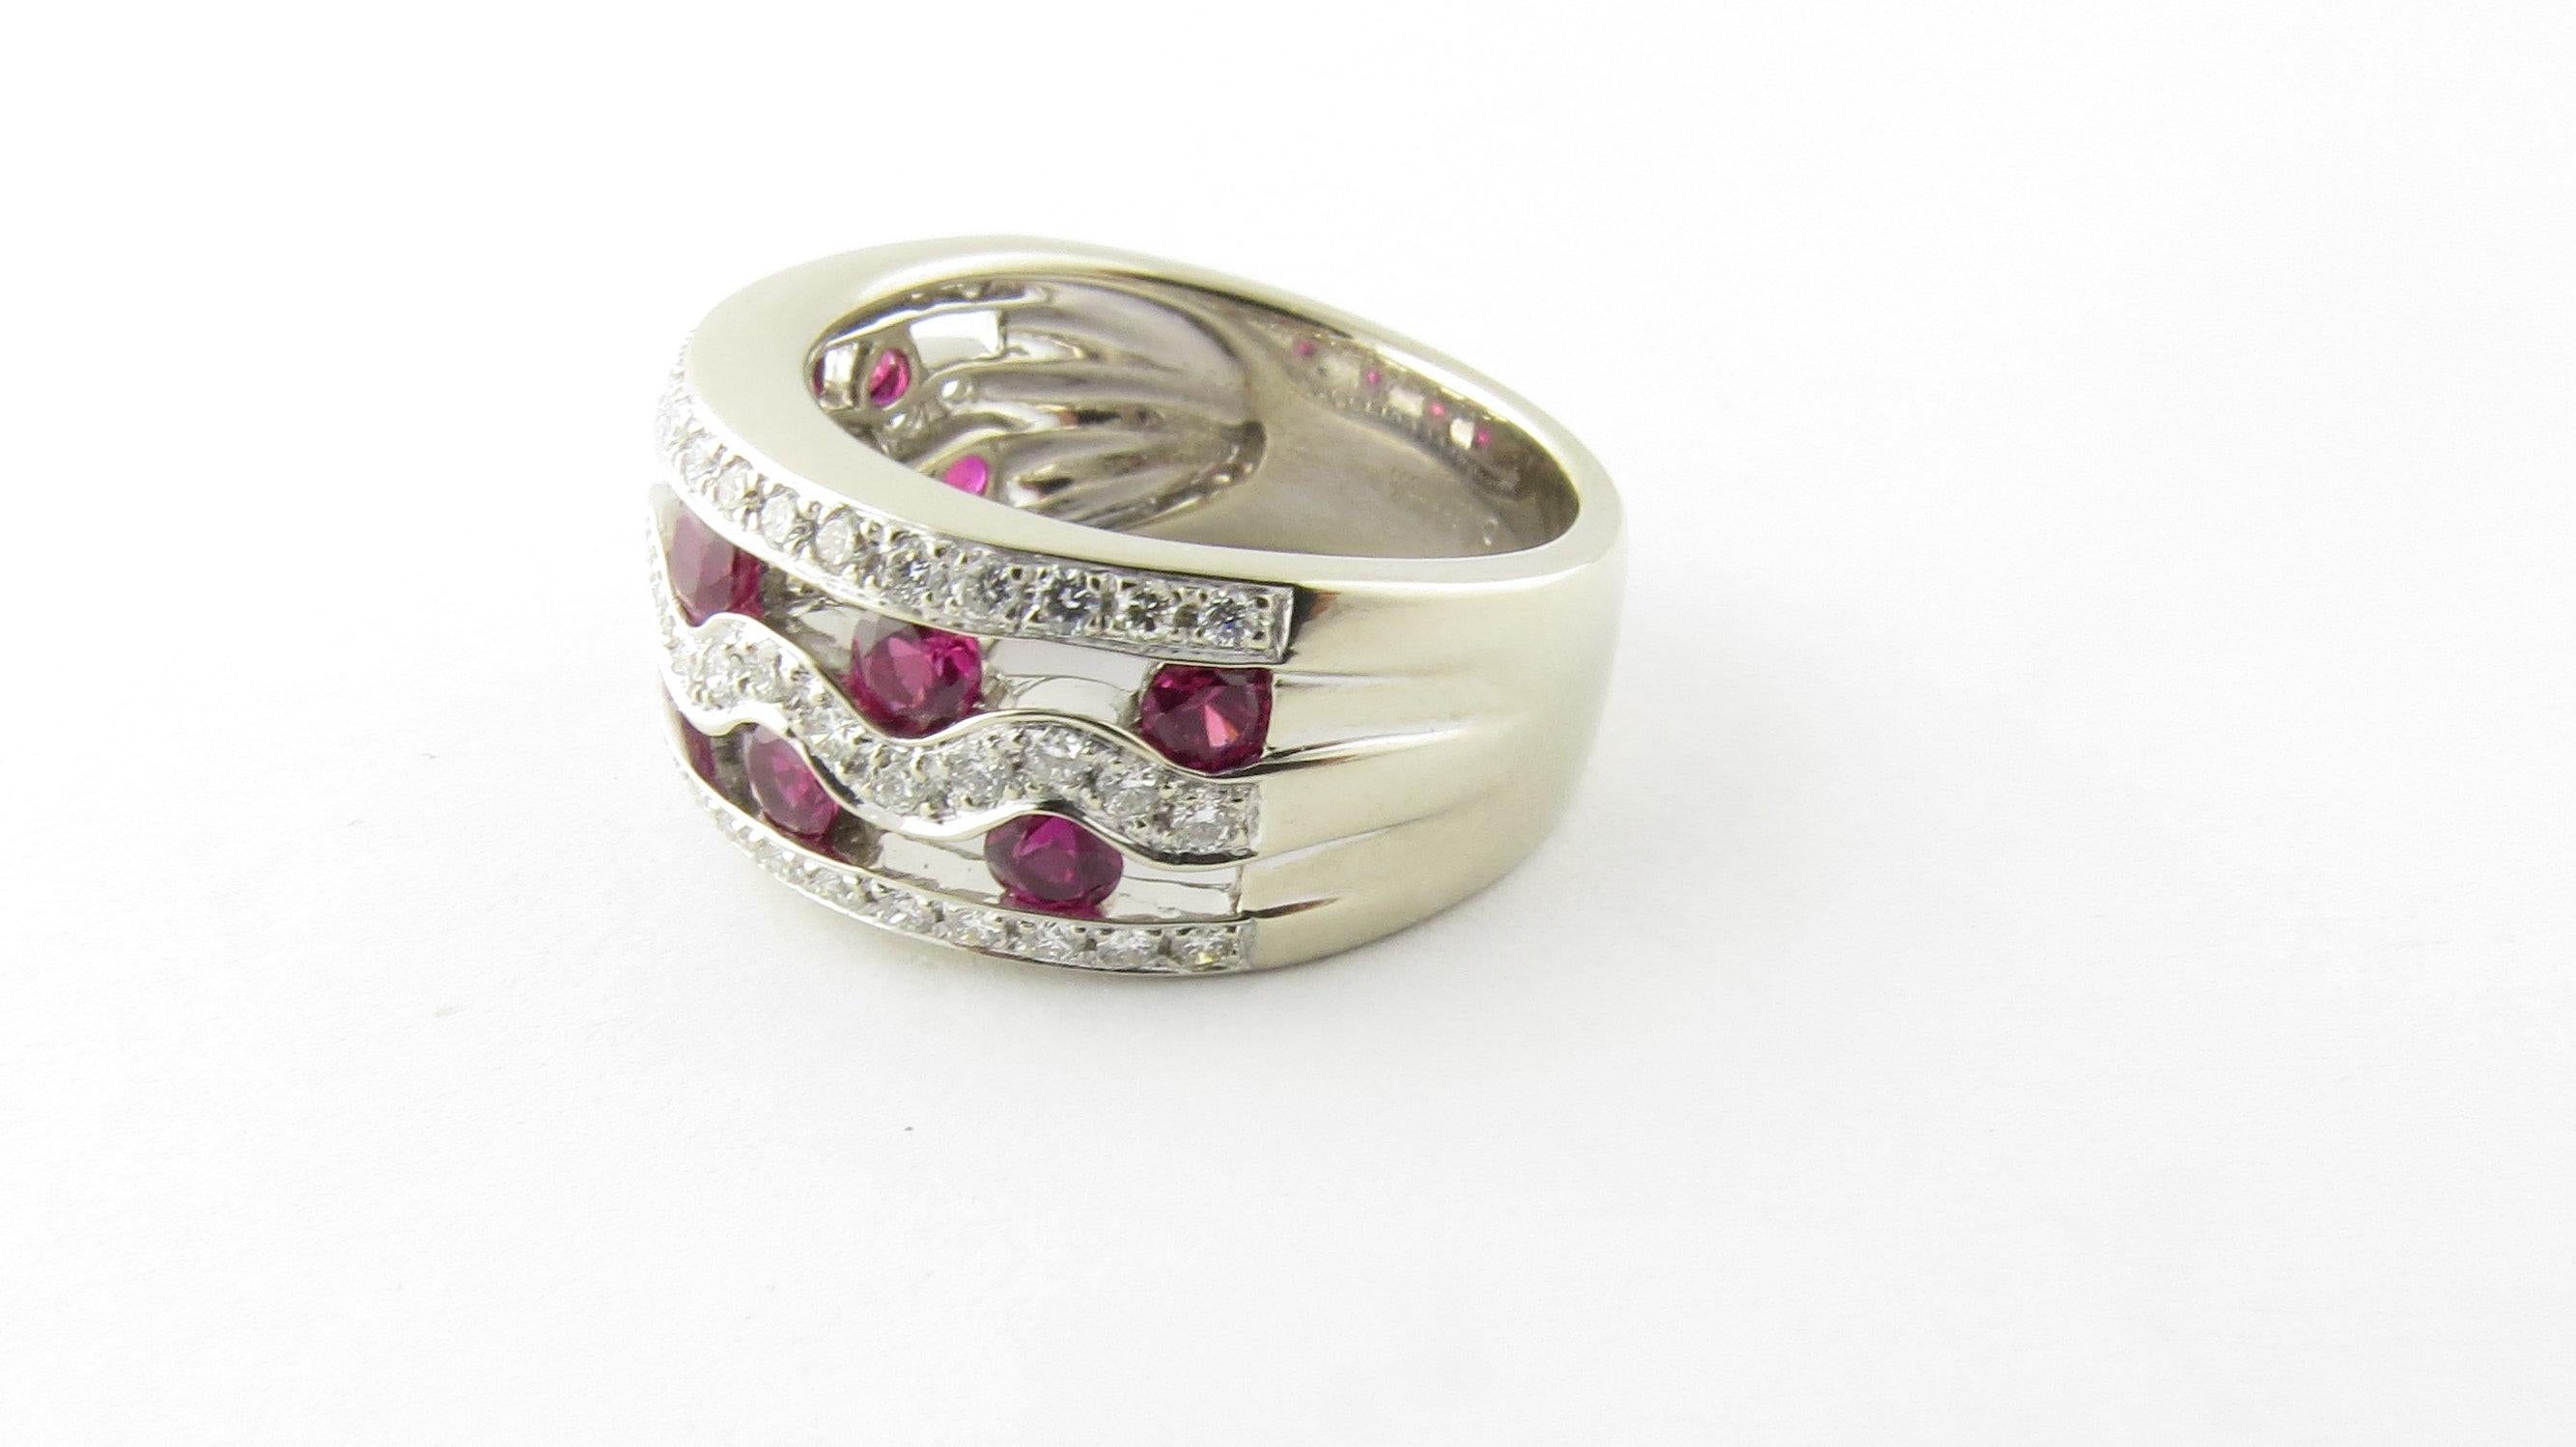 Vintage 14 Karat White Gold Pink Sapphires and Diamond Ring Size 6.5- 
This stunning ring features 57 round brilliant cut diamonds and ten round genuine pink sapphires set in classic 14K white gold. Shank measures 6 mm. Front width: 10 mm.